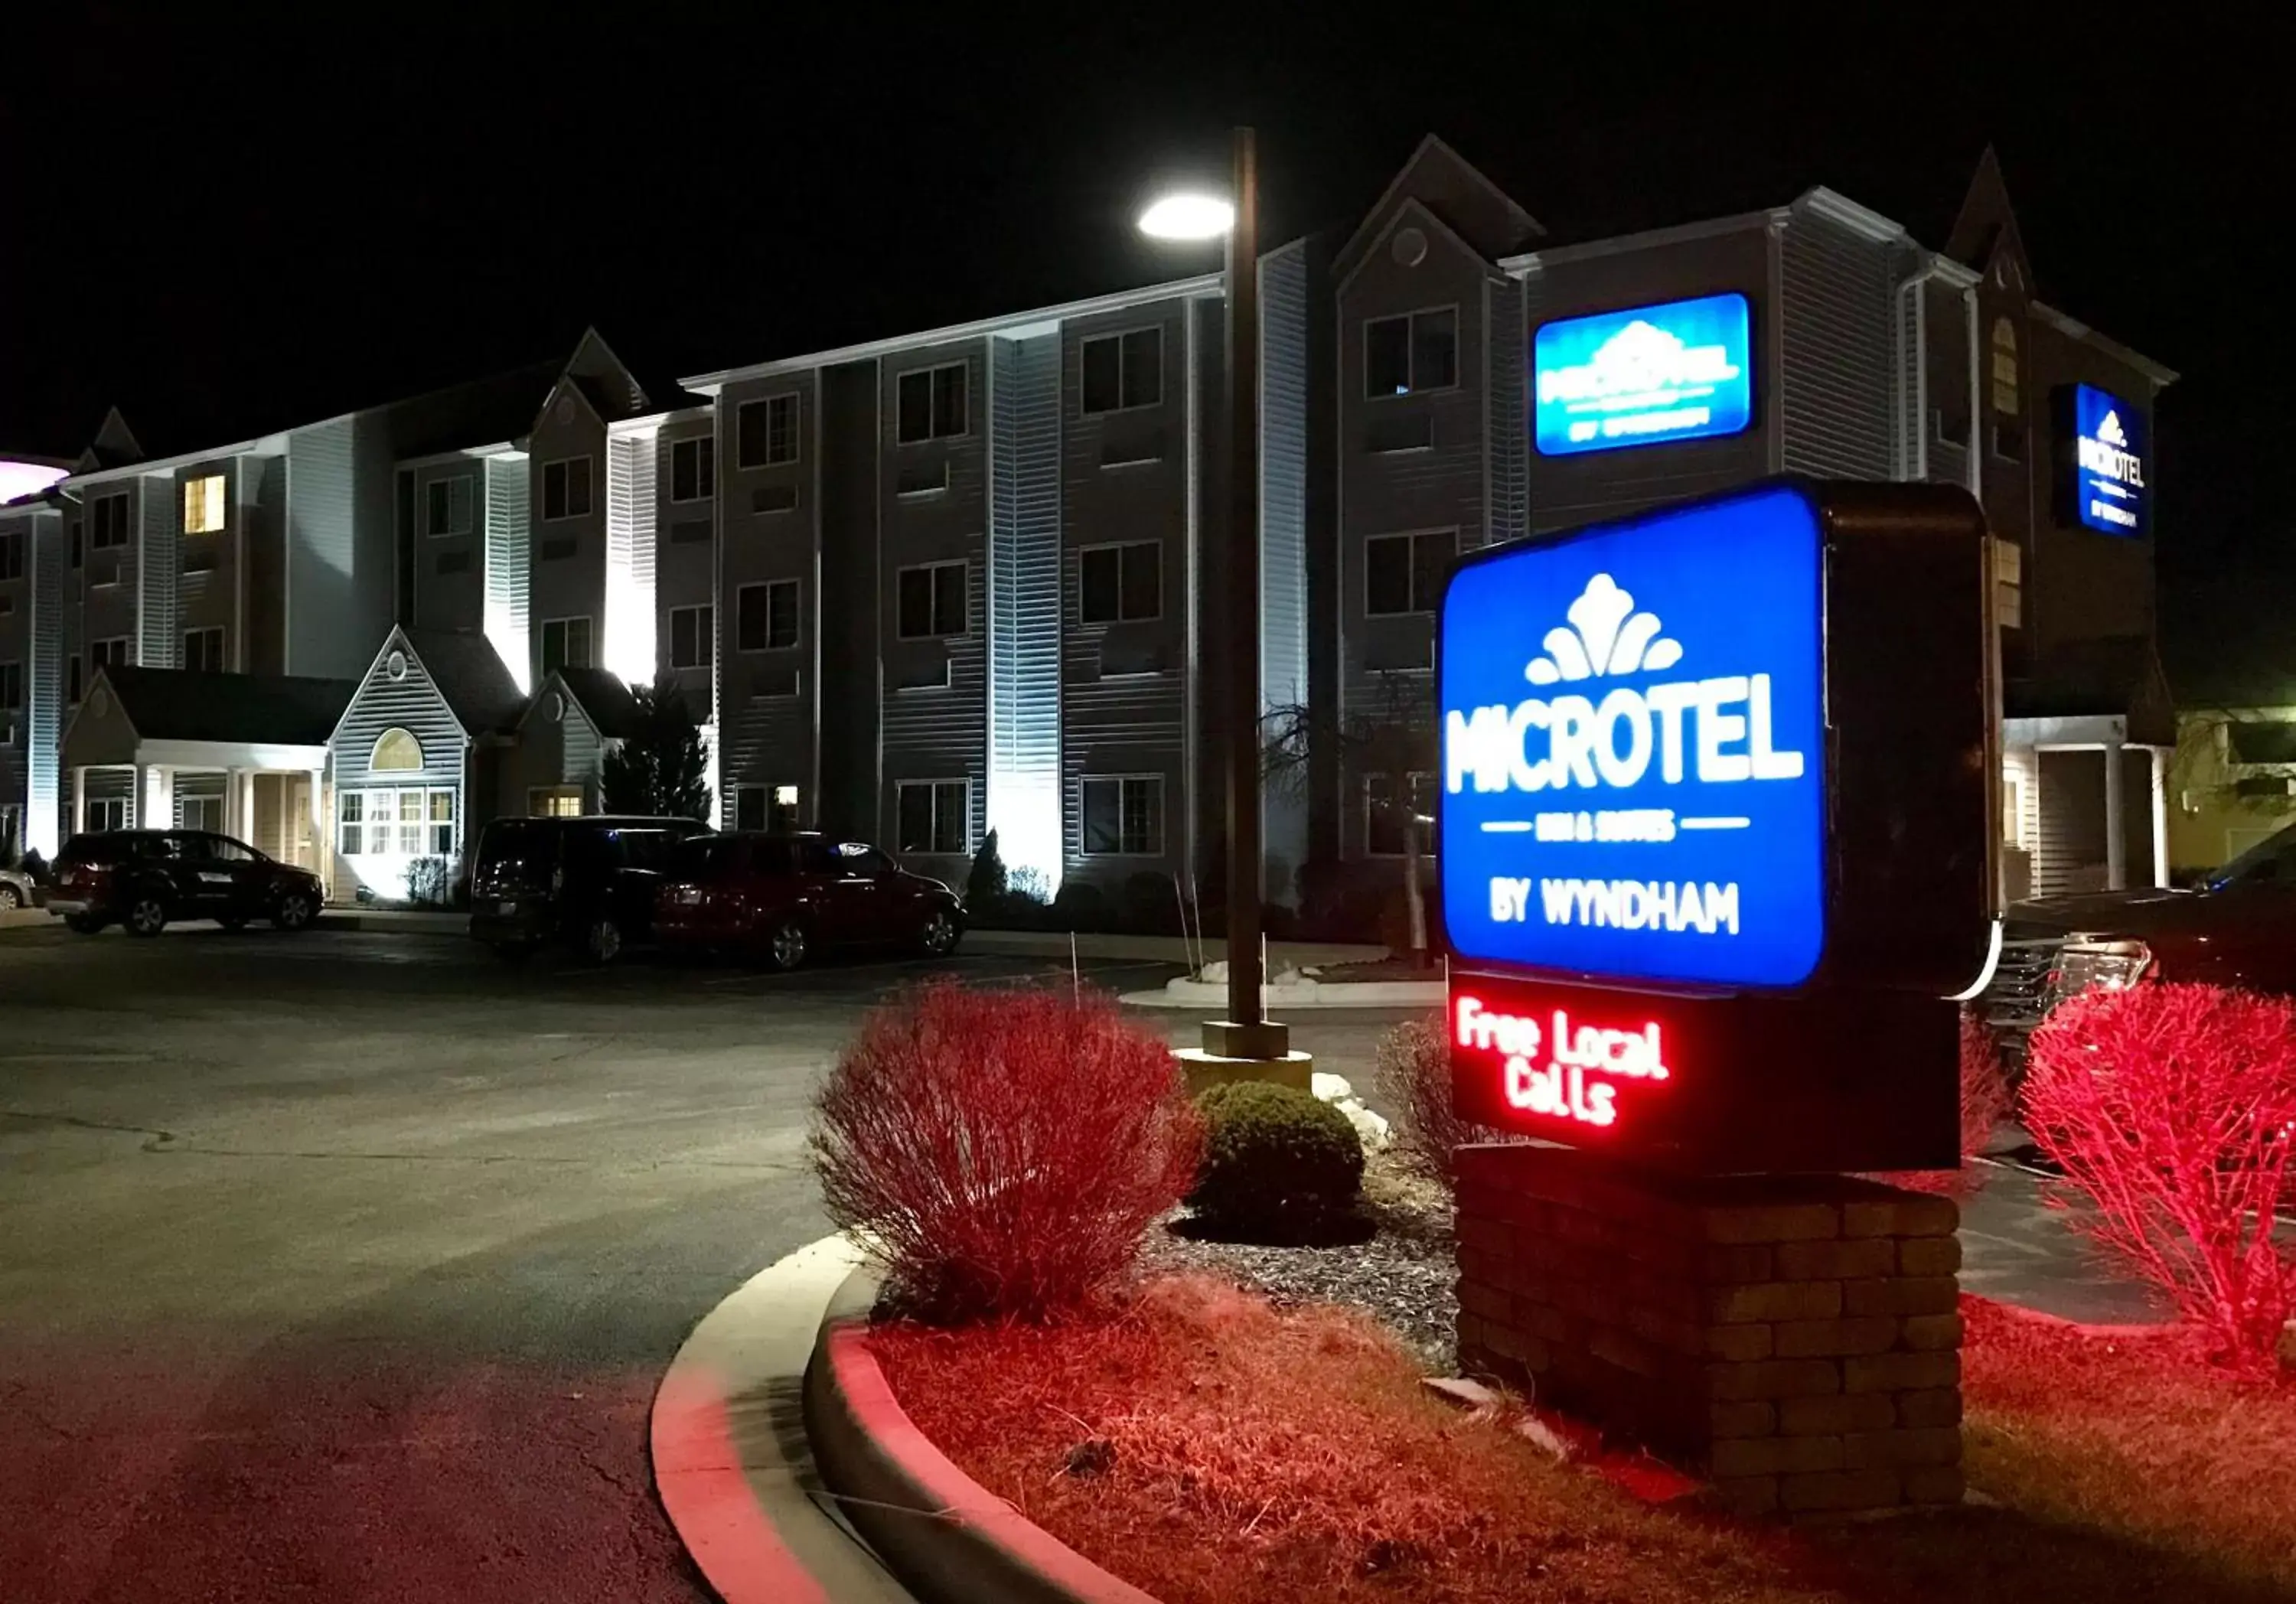 Property Building in Microtel Inn and Suites Elkhart